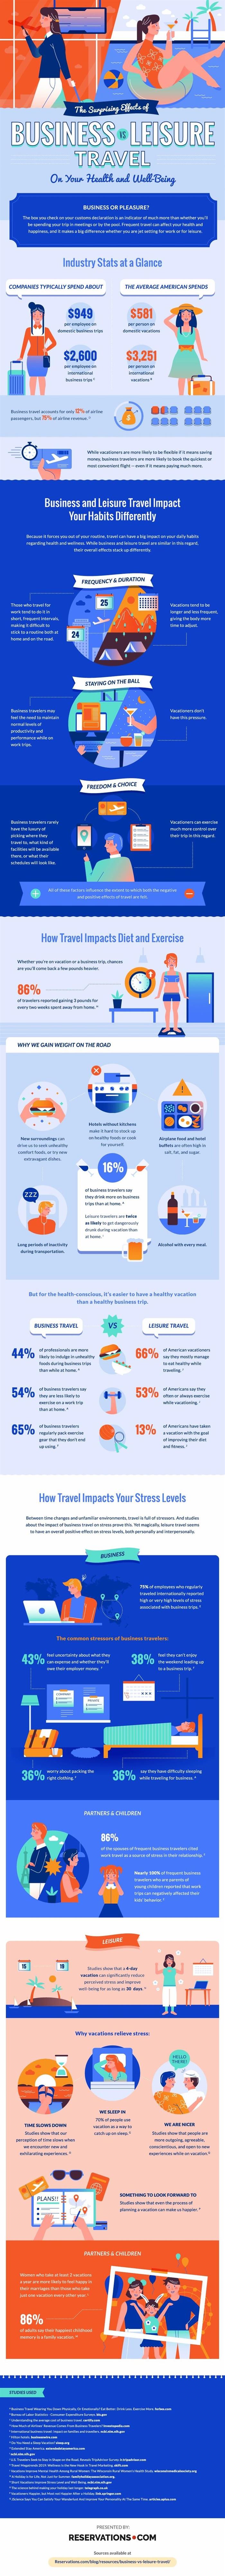 Business vs Leisure Travel Infographic